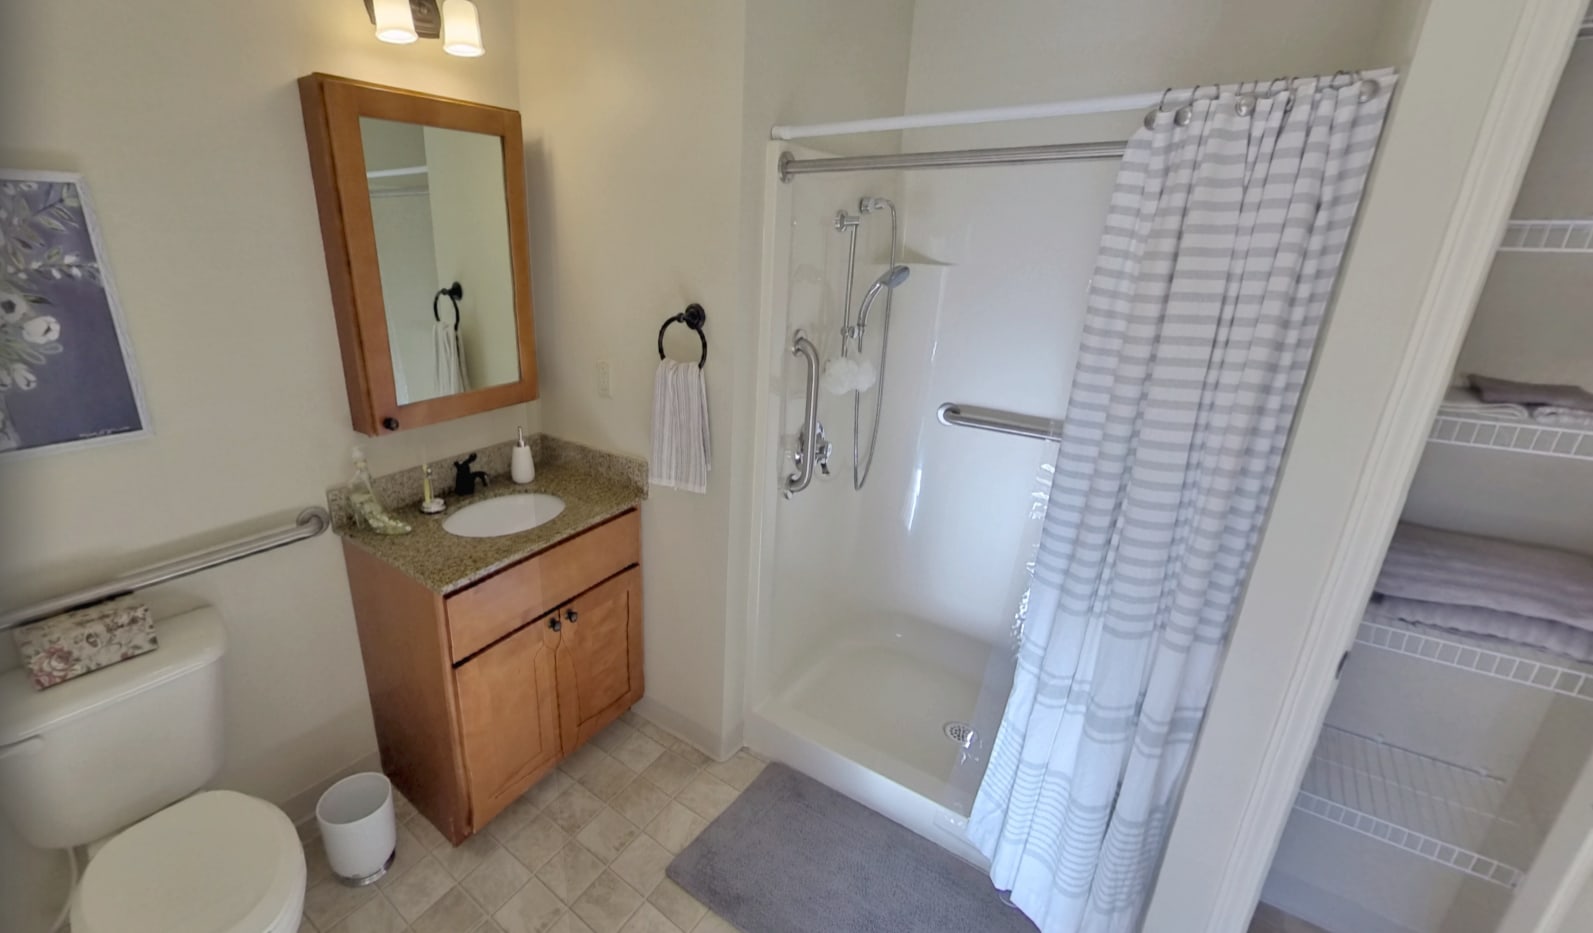 Bathroom of one bedroom apartment at The Hearth at Hendersonville in Hendersonville, Tennessee 